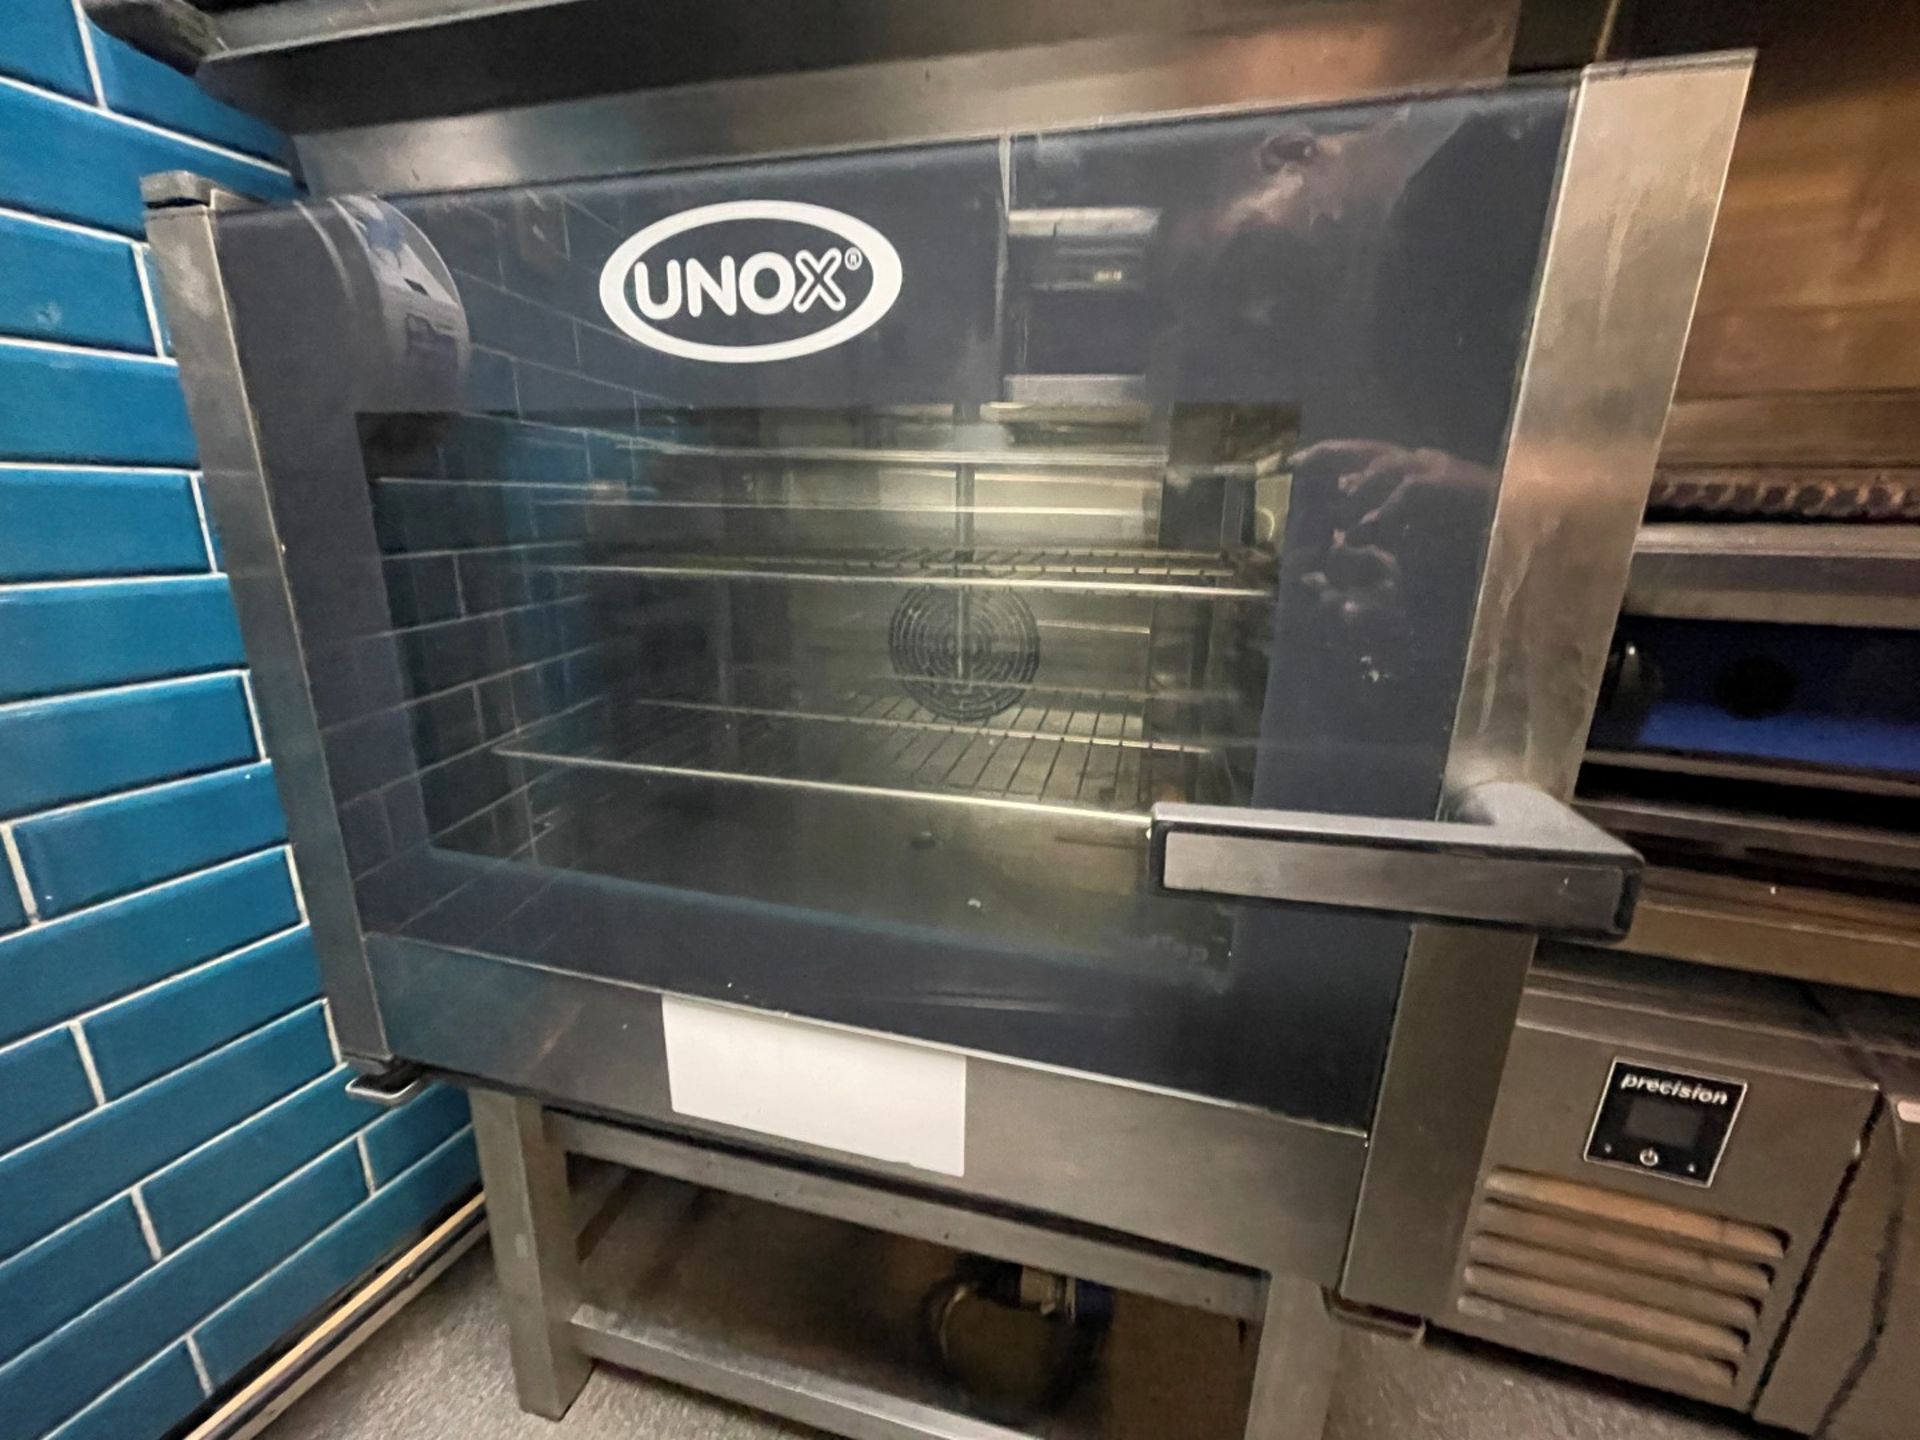 1 x Unox ChefTop XVL385 Commercial 3 Phase Double Oven For Slow Cooking Meats, Proving Dough & More - Image 7 of 26